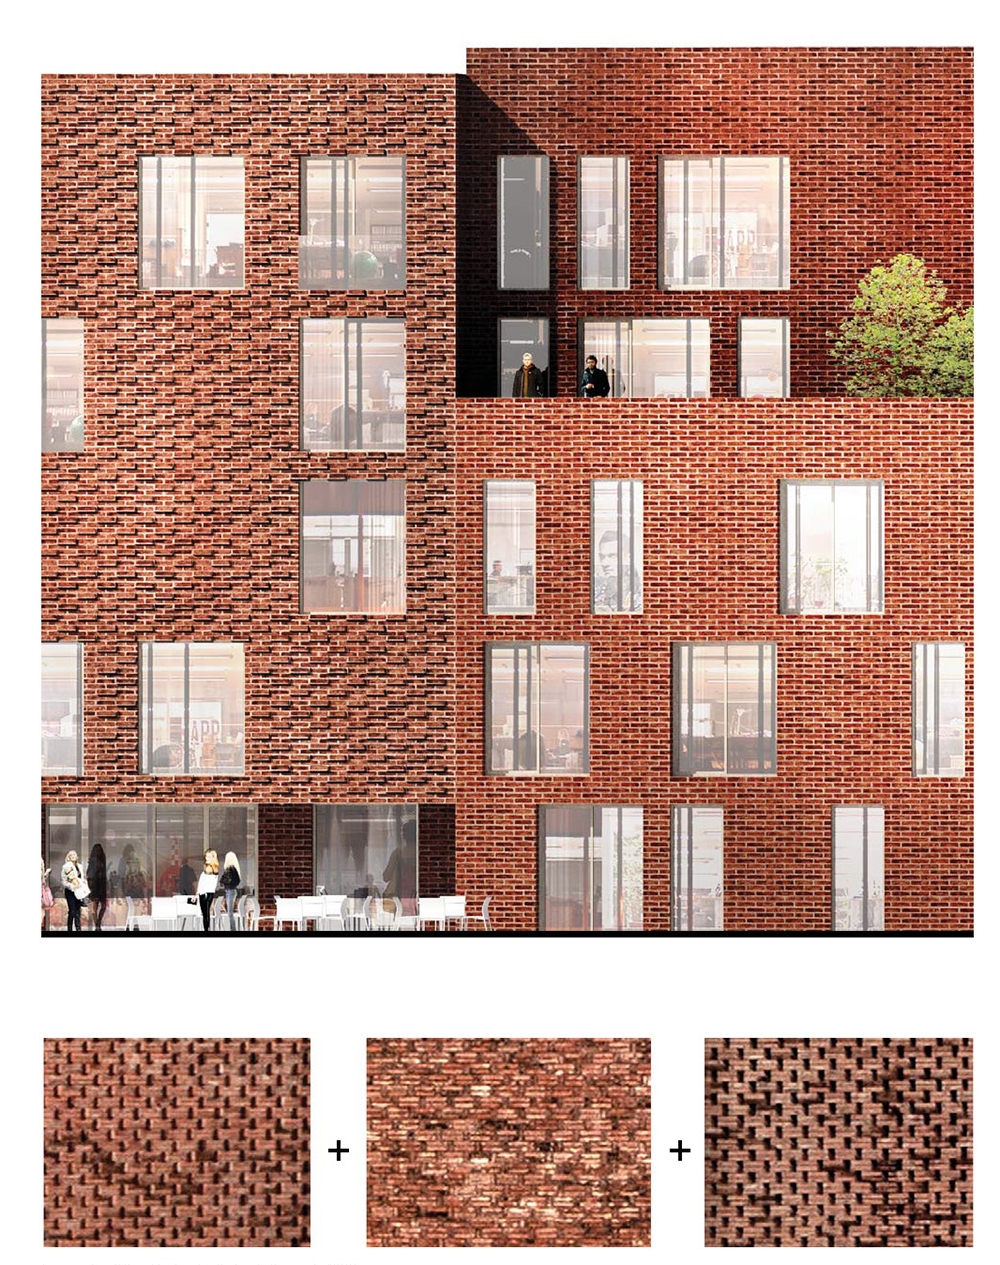 Archisearch - Nuances in the facade breaks down the scale of the builing in the context, facade expression by ADEPT / Different brickwork in the facade, diagram by ADEPT 